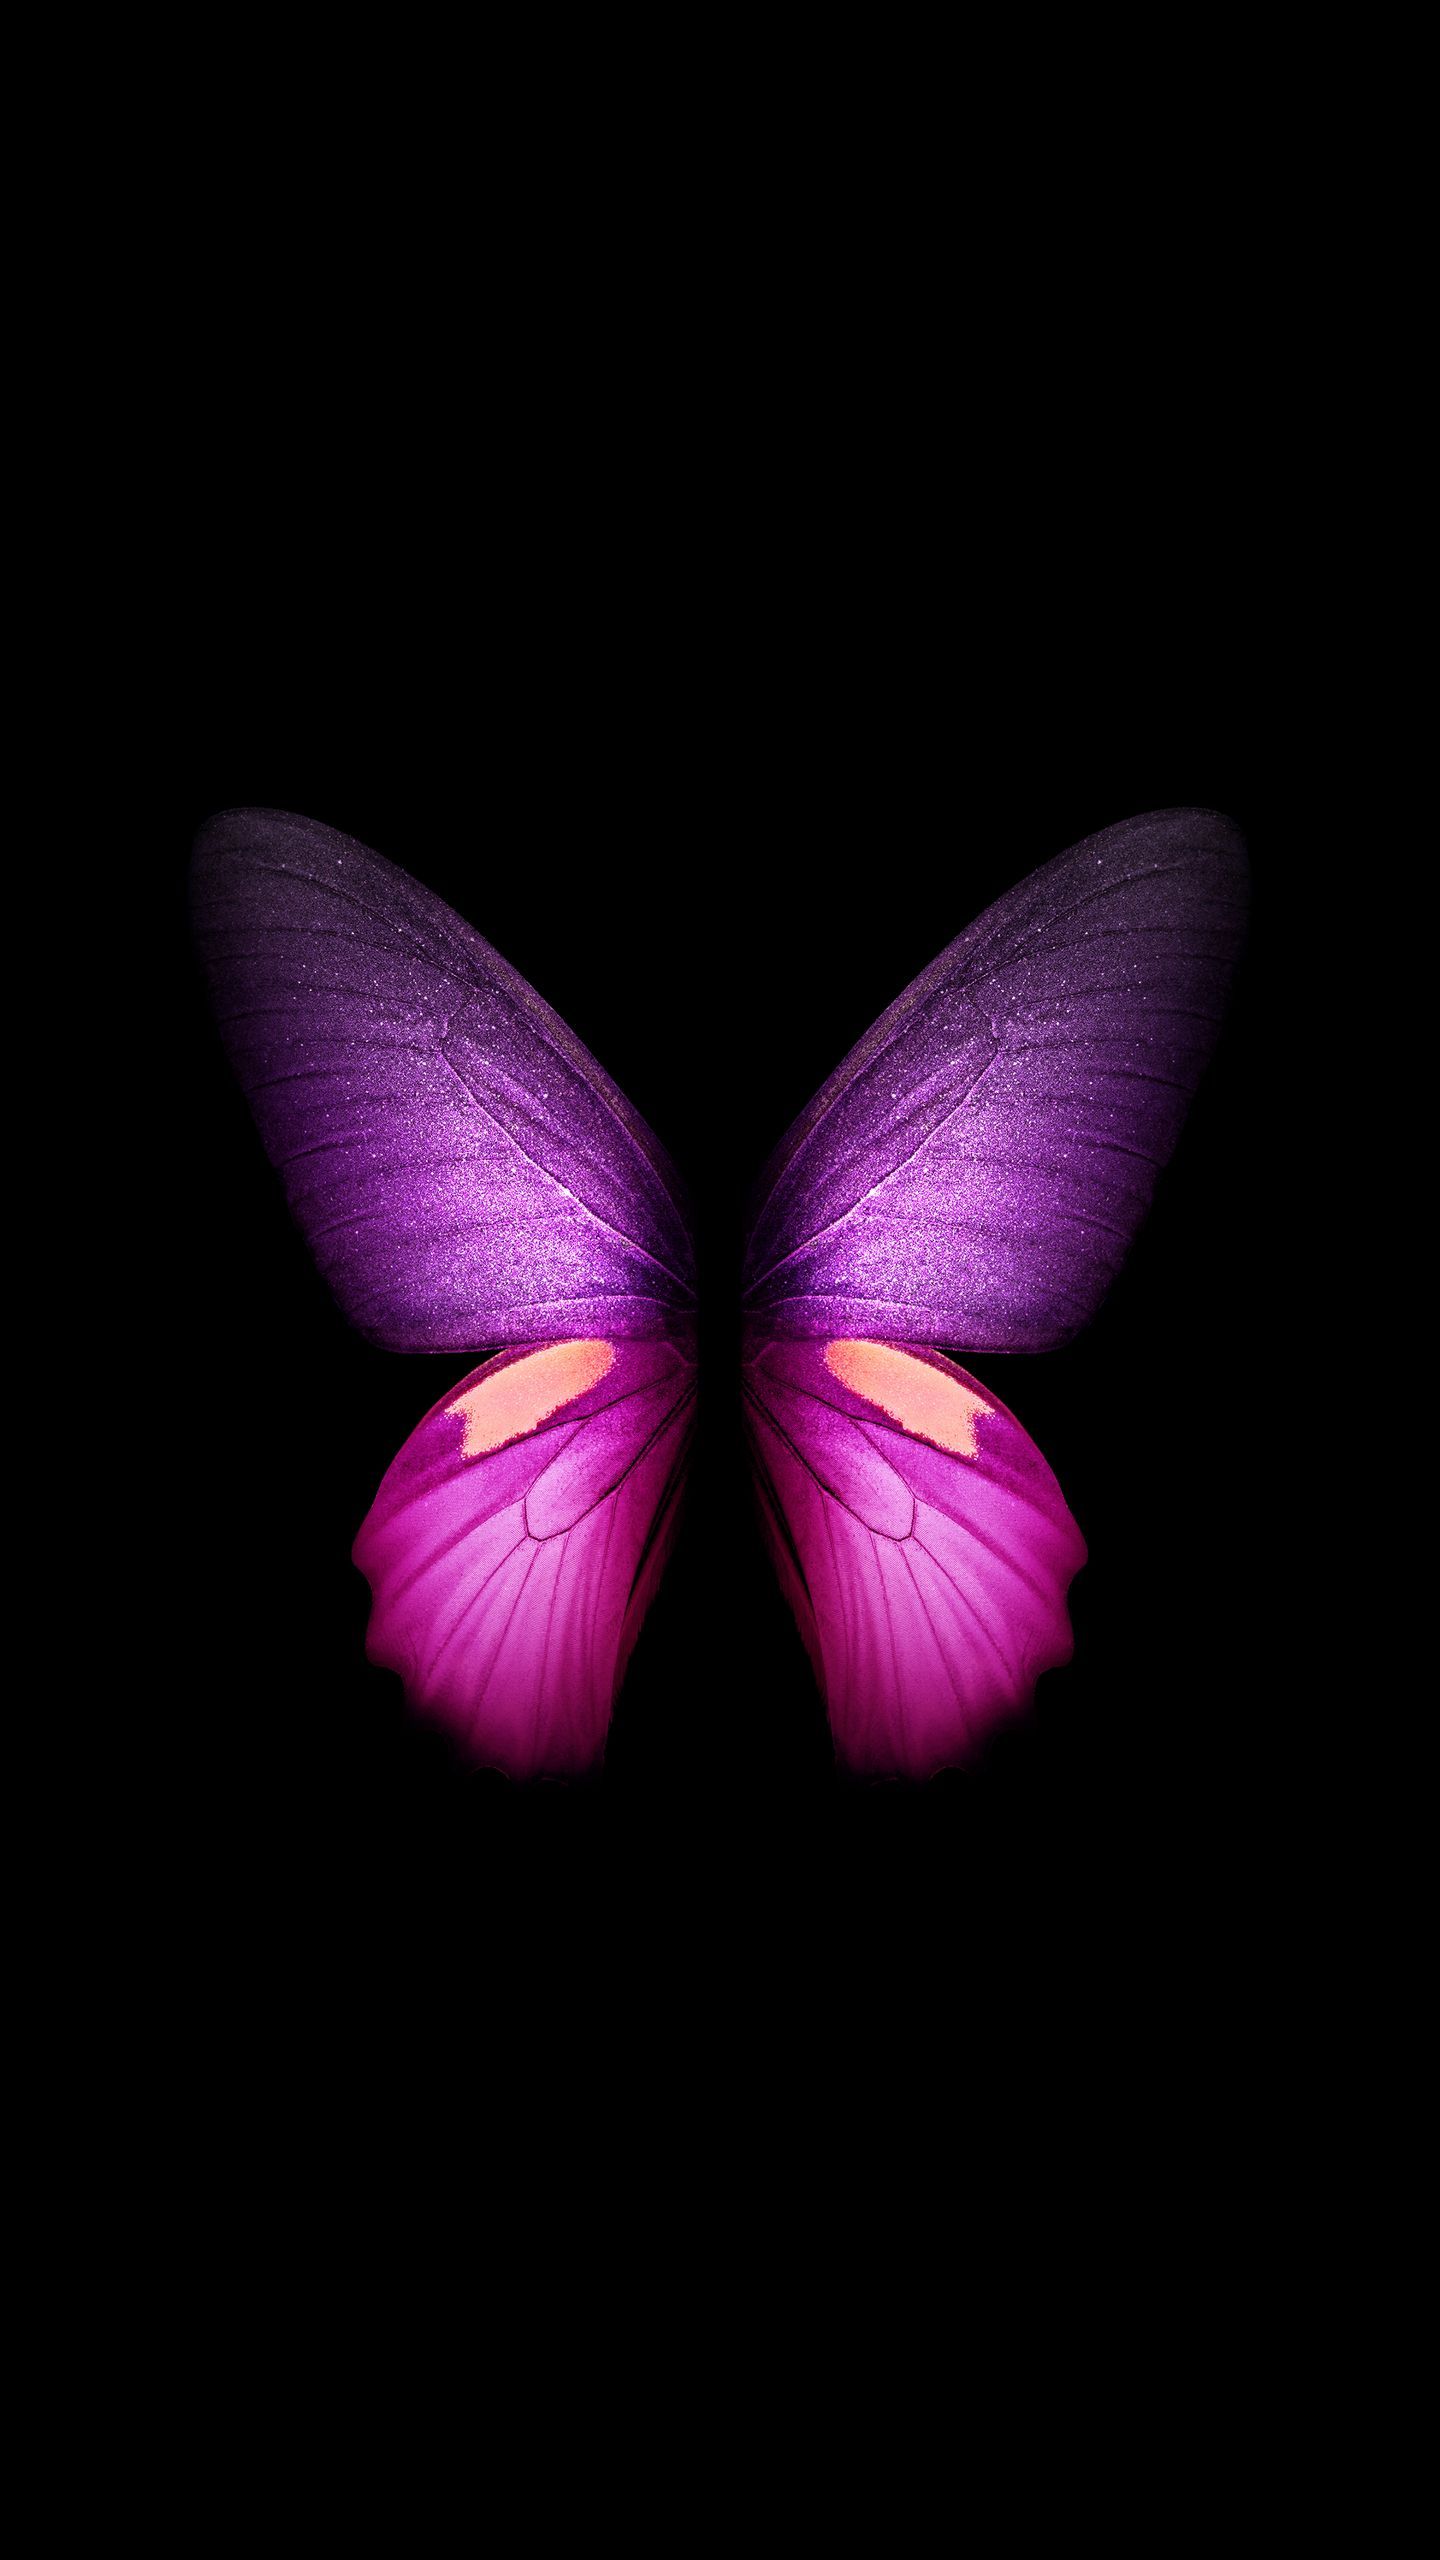 Purple Amoled Wallpapers - Wallpaper Cave